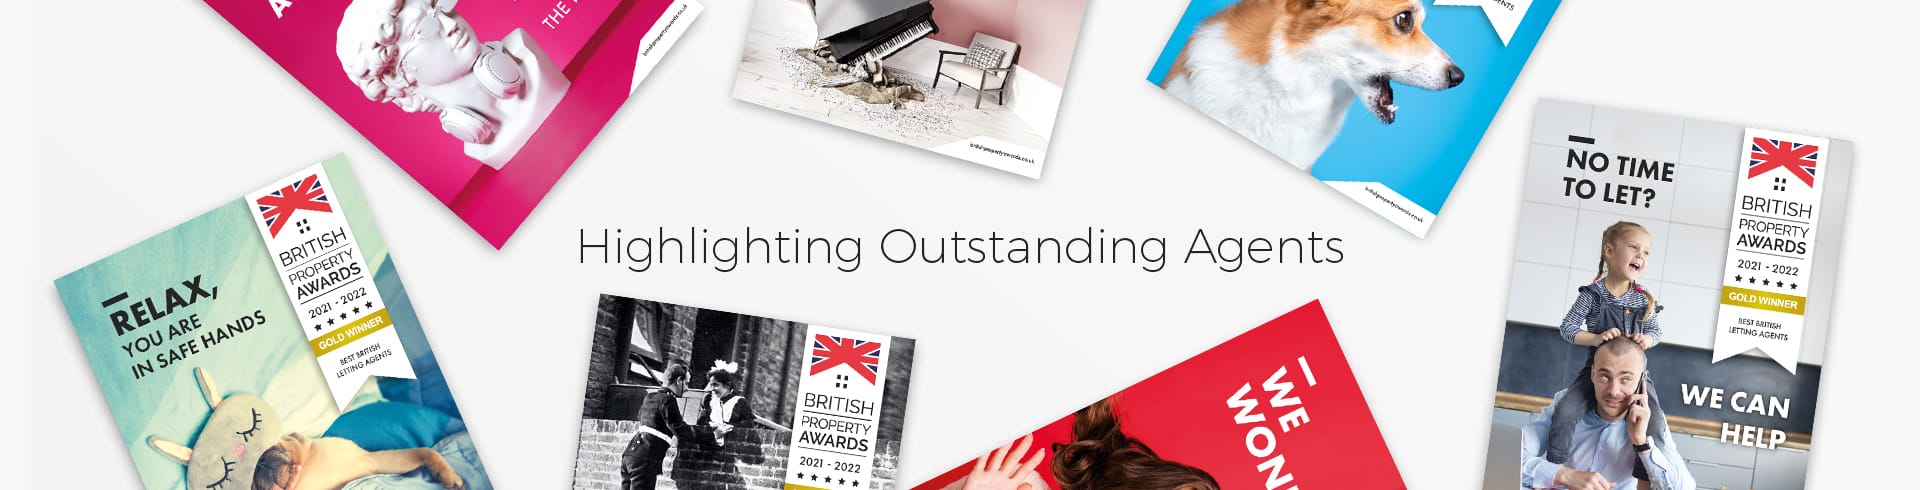 Highlighting Outstanding Agents